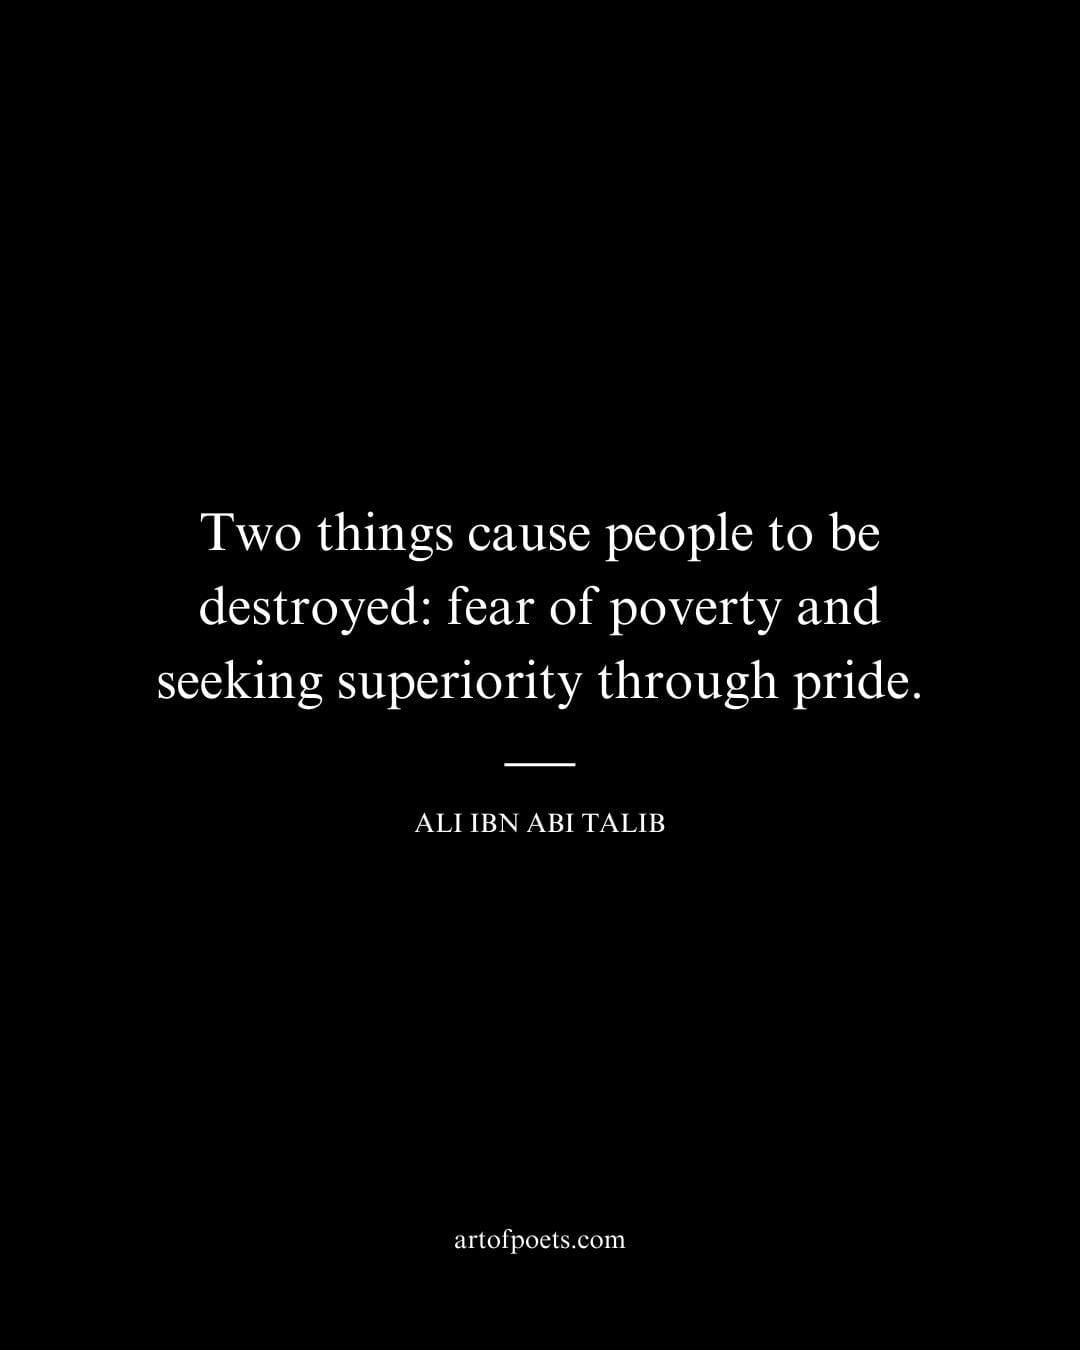 Two things cause people to be destroyed fear of poverty and seeking superiority through pride